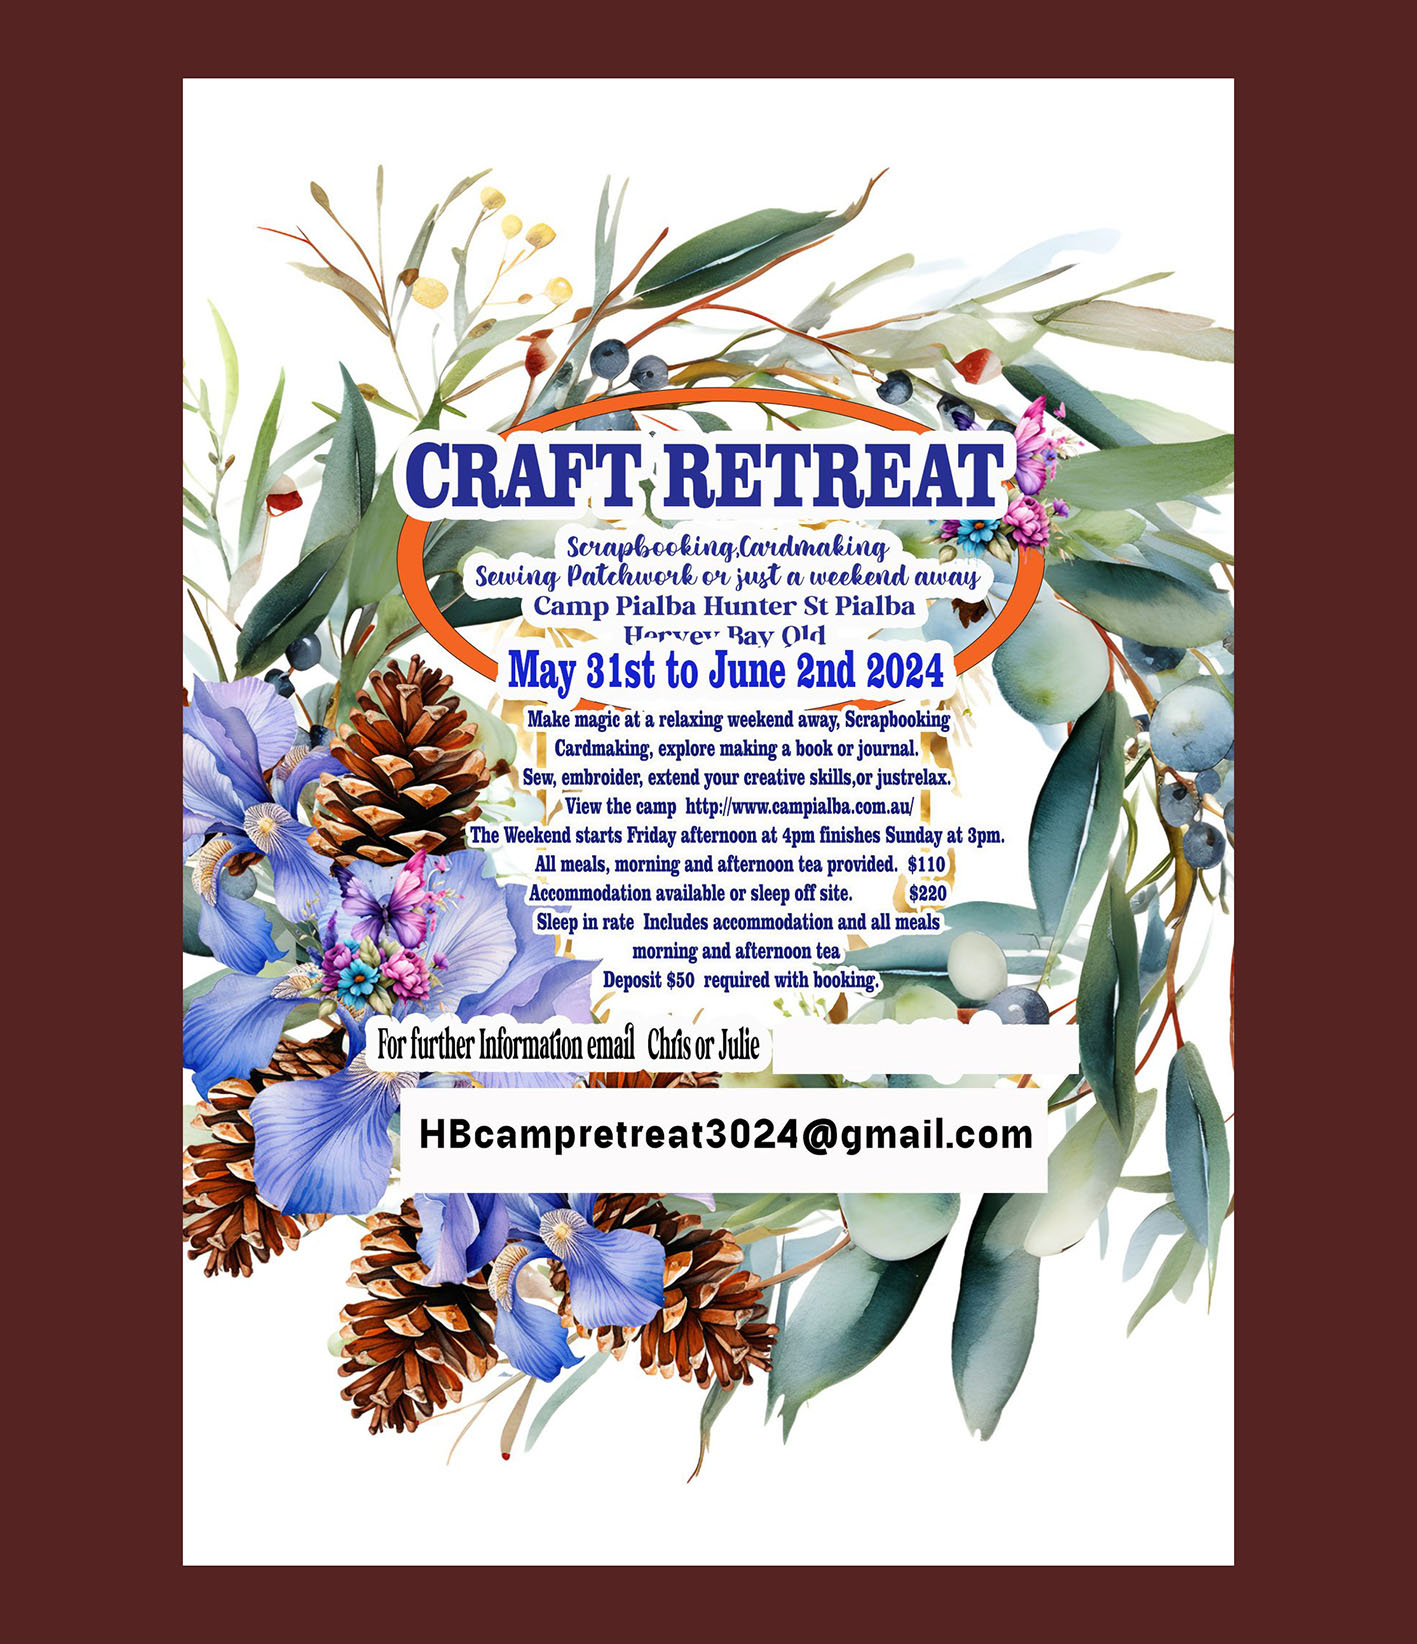 Craft retreat, May 31 to June 2nd 2024